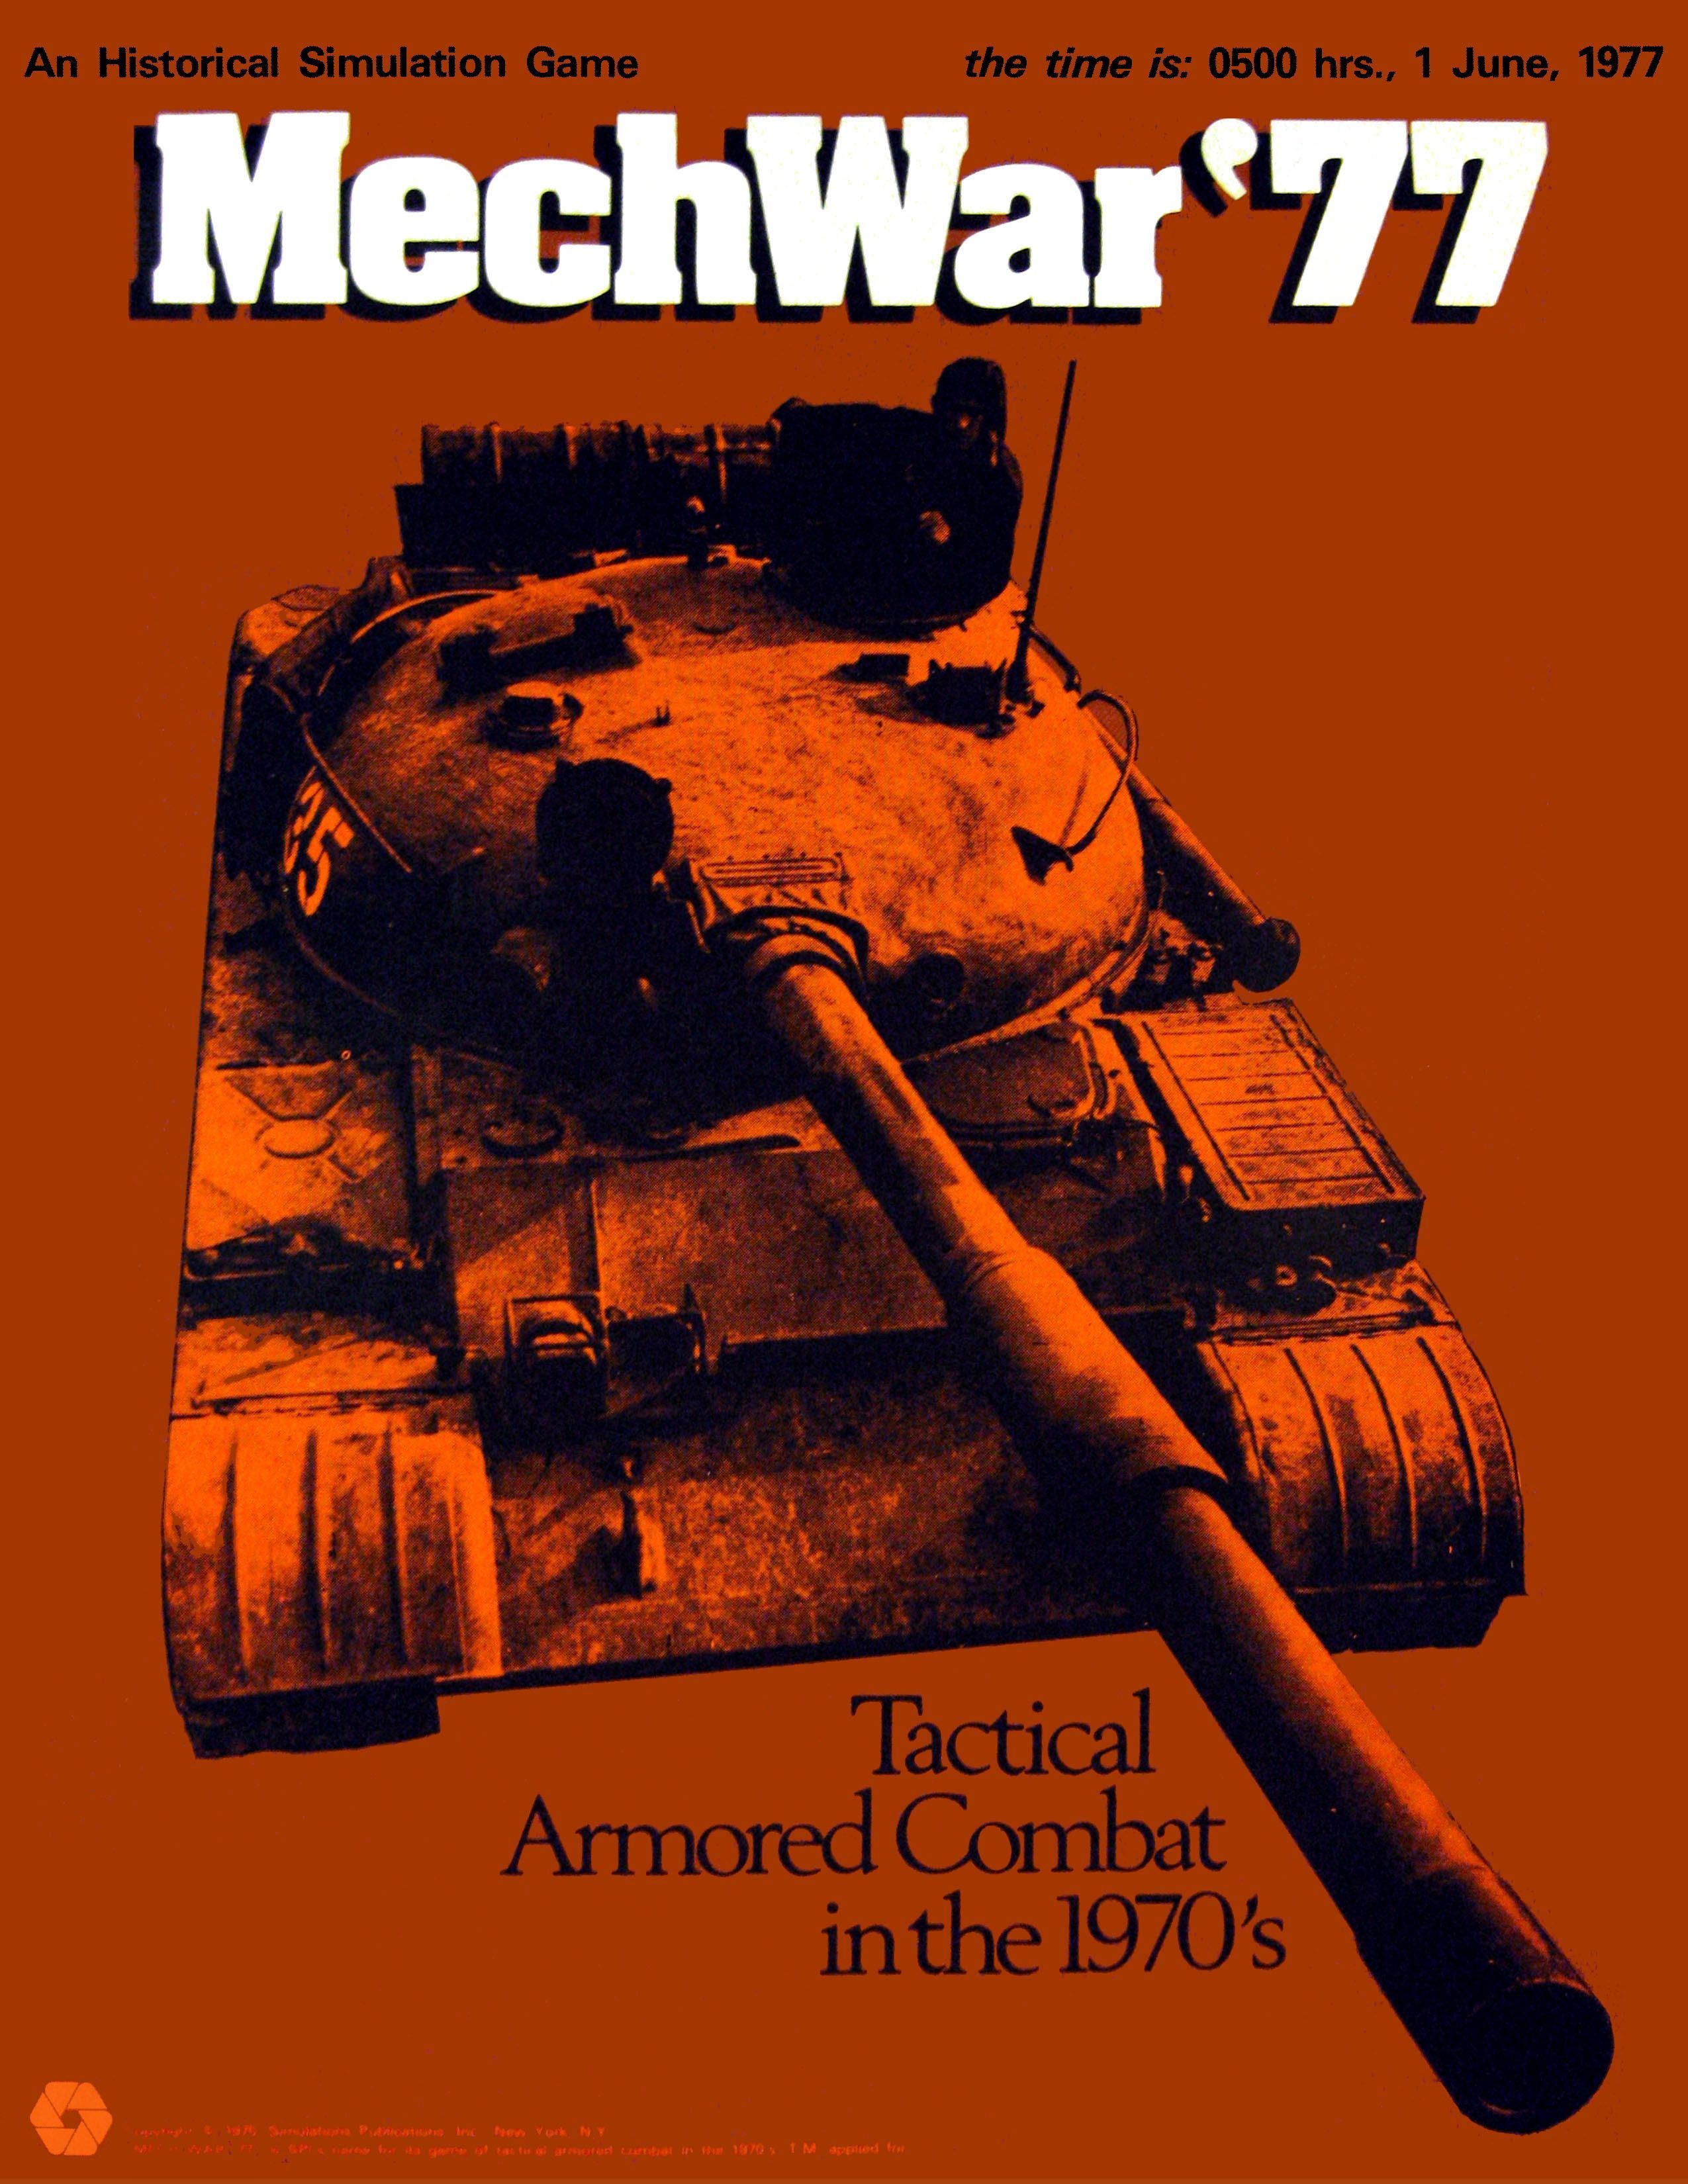 MechWar '77: Tactical Armored Combat in the 1970's